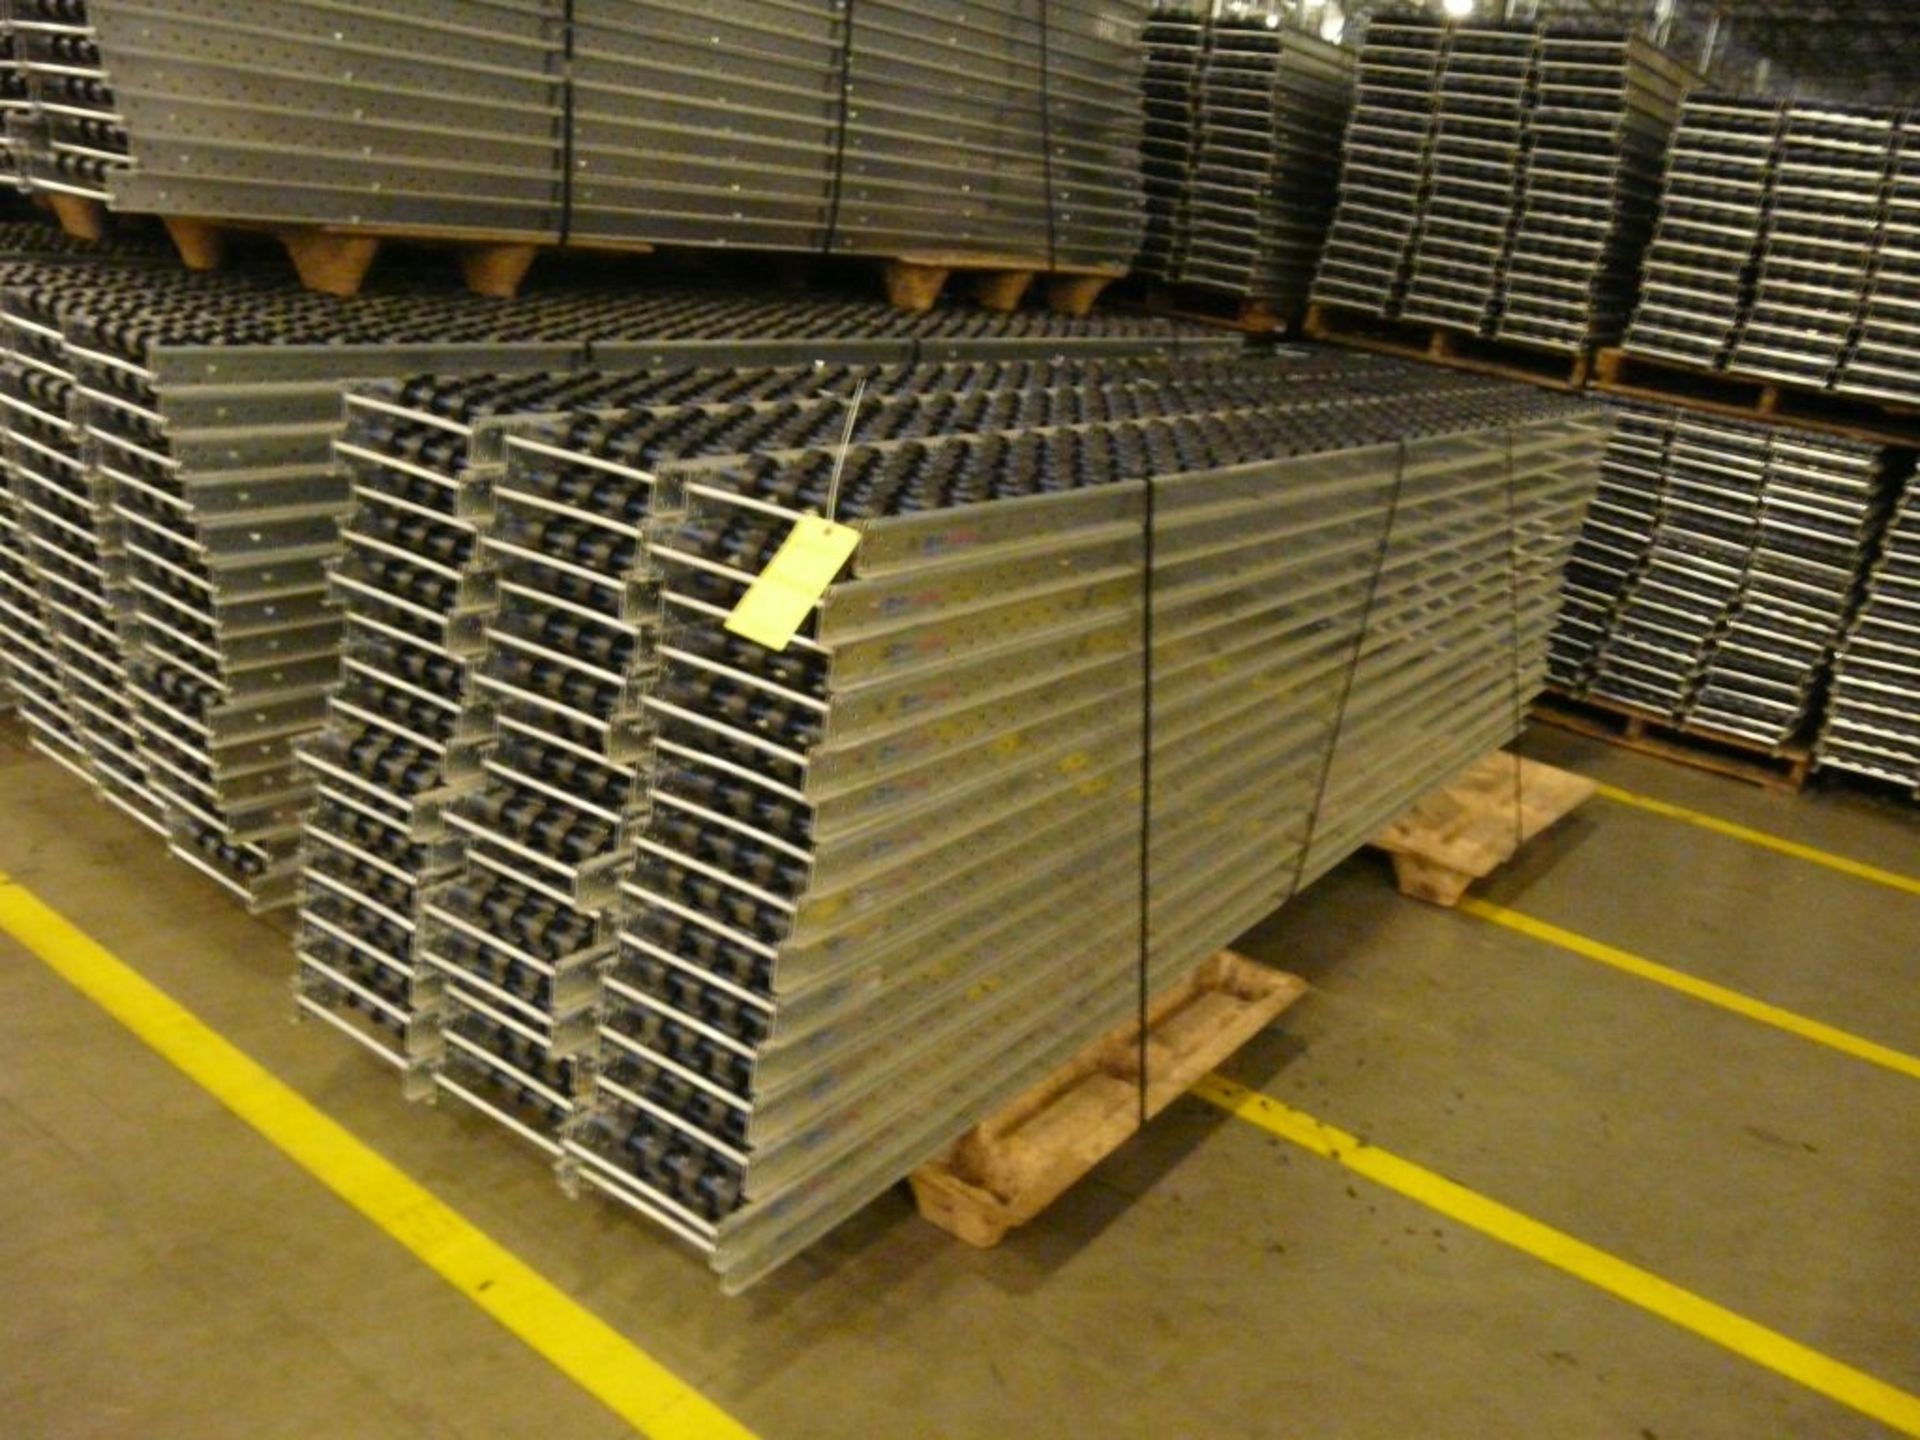 Lot of (90) SpanTrack Wheelbed Carton Flow Conveyors - 11.5'L x 11"W; Tag: 223646 - $30 Lot